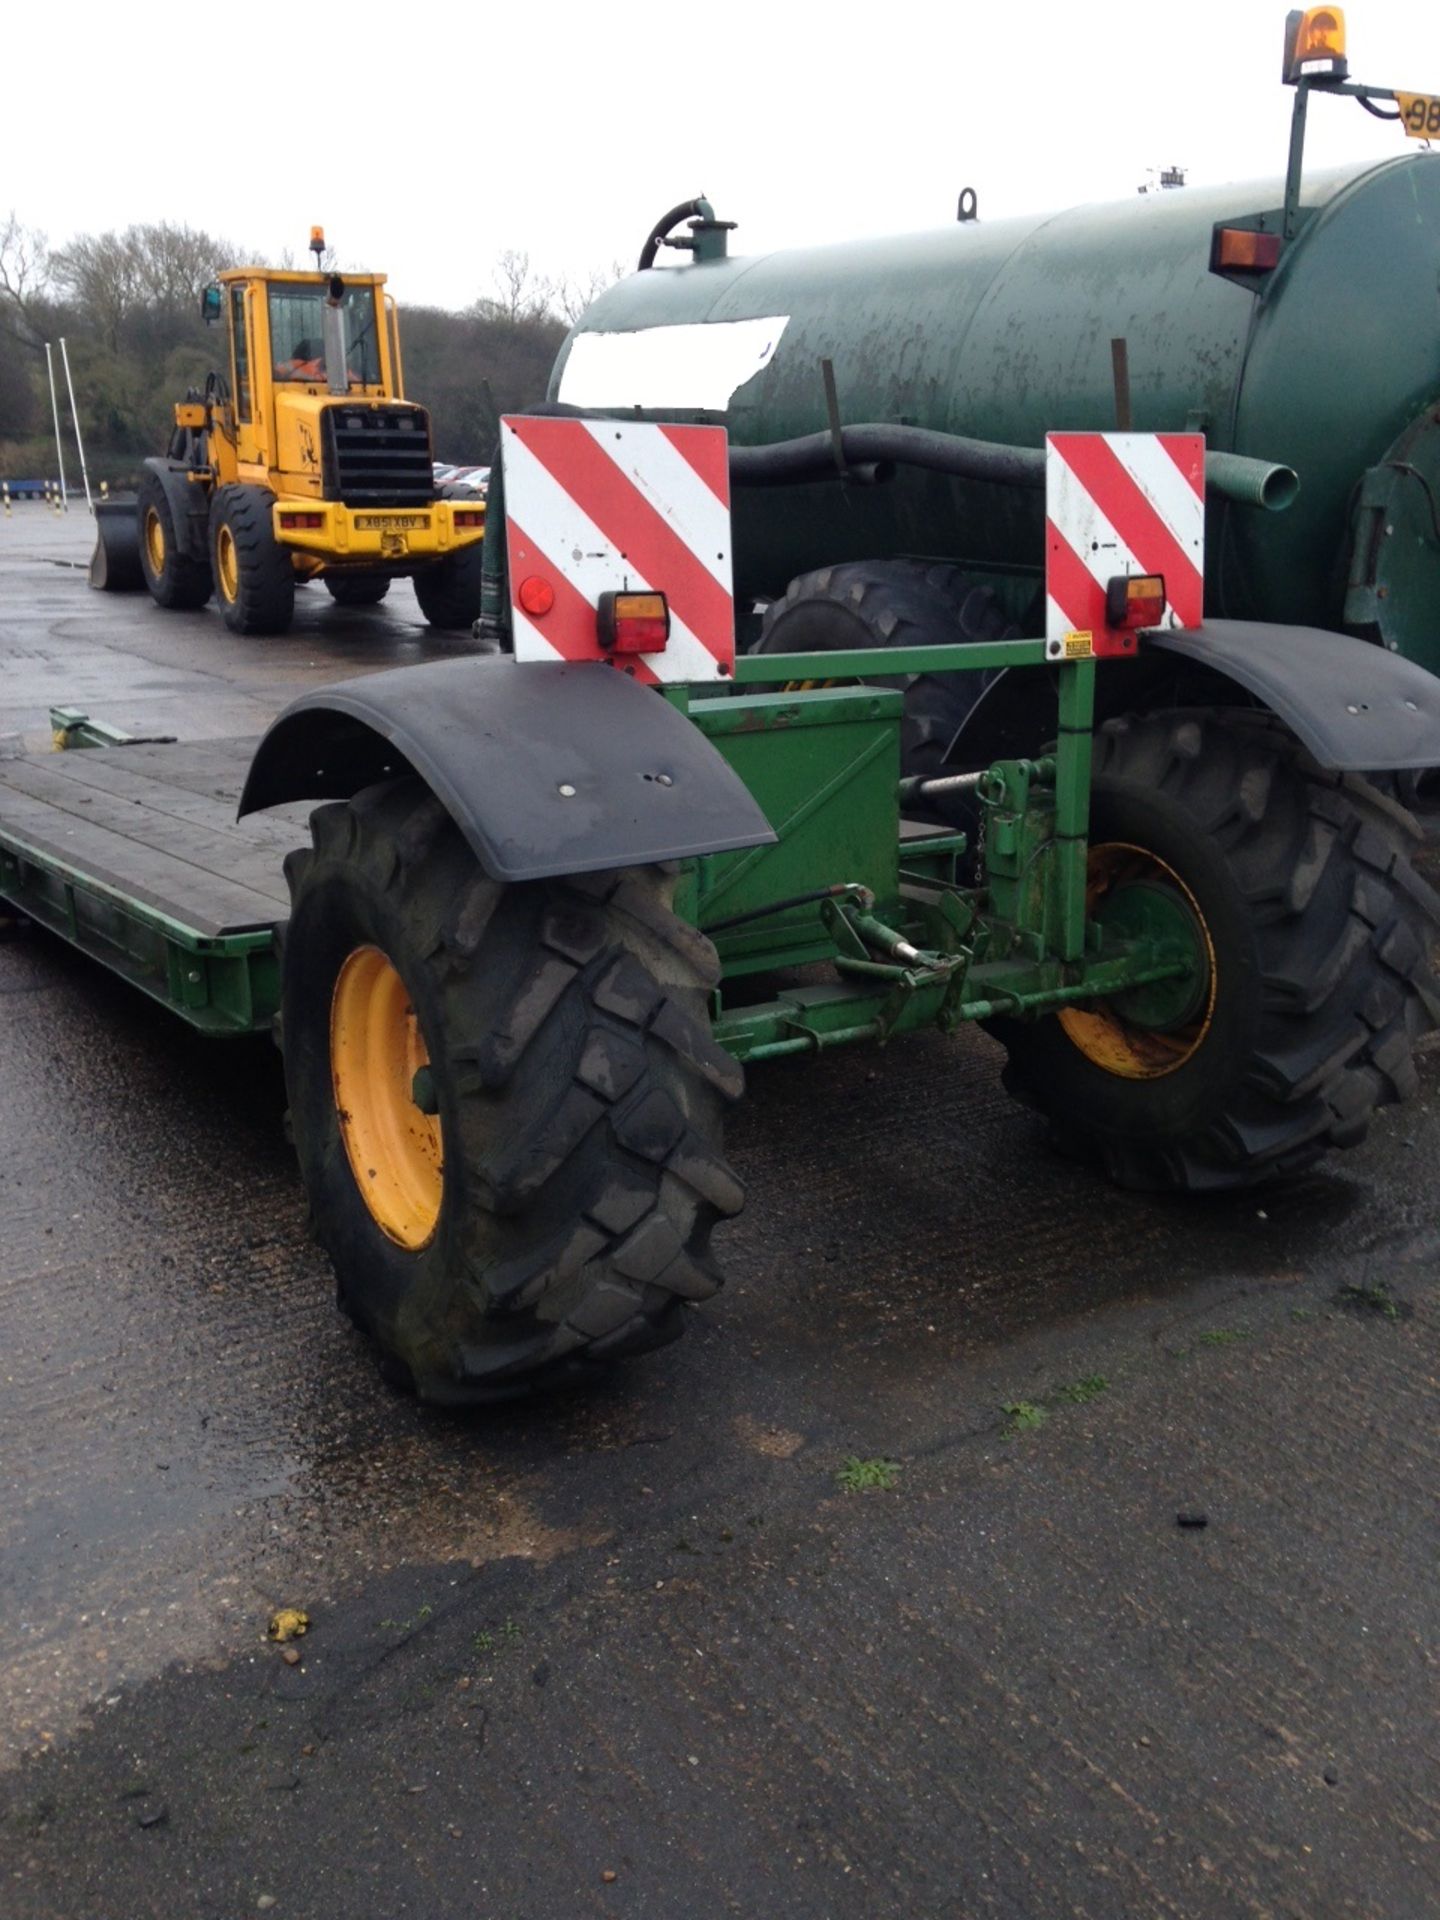 Low Loader Trailer
Good condition